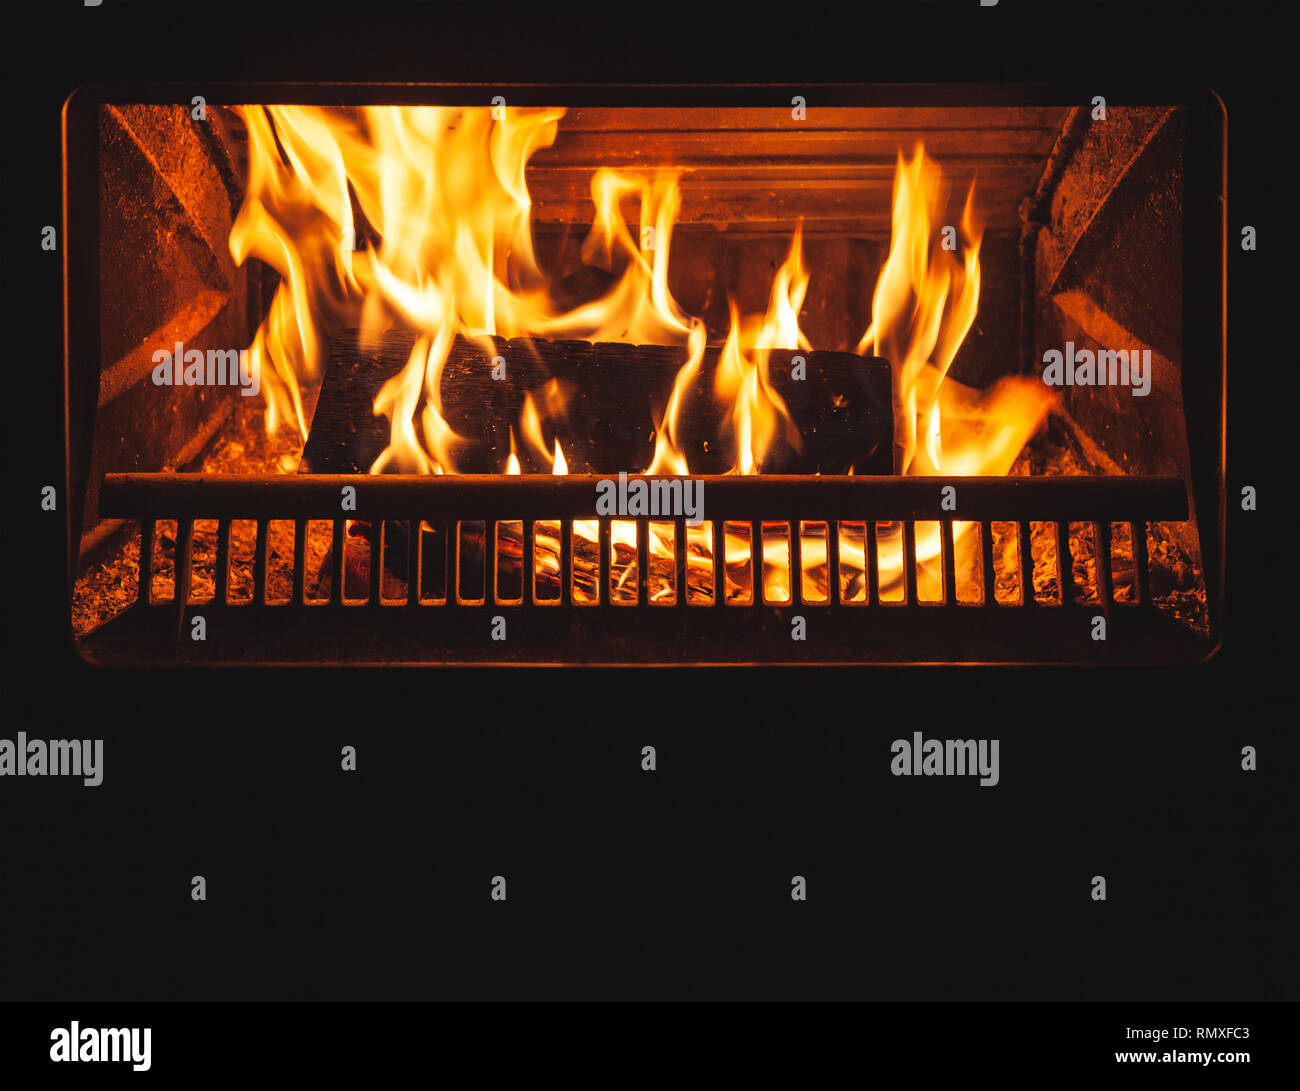 Firewood burns in the fireplace with a bright flame behind closed glass door Stock Photo